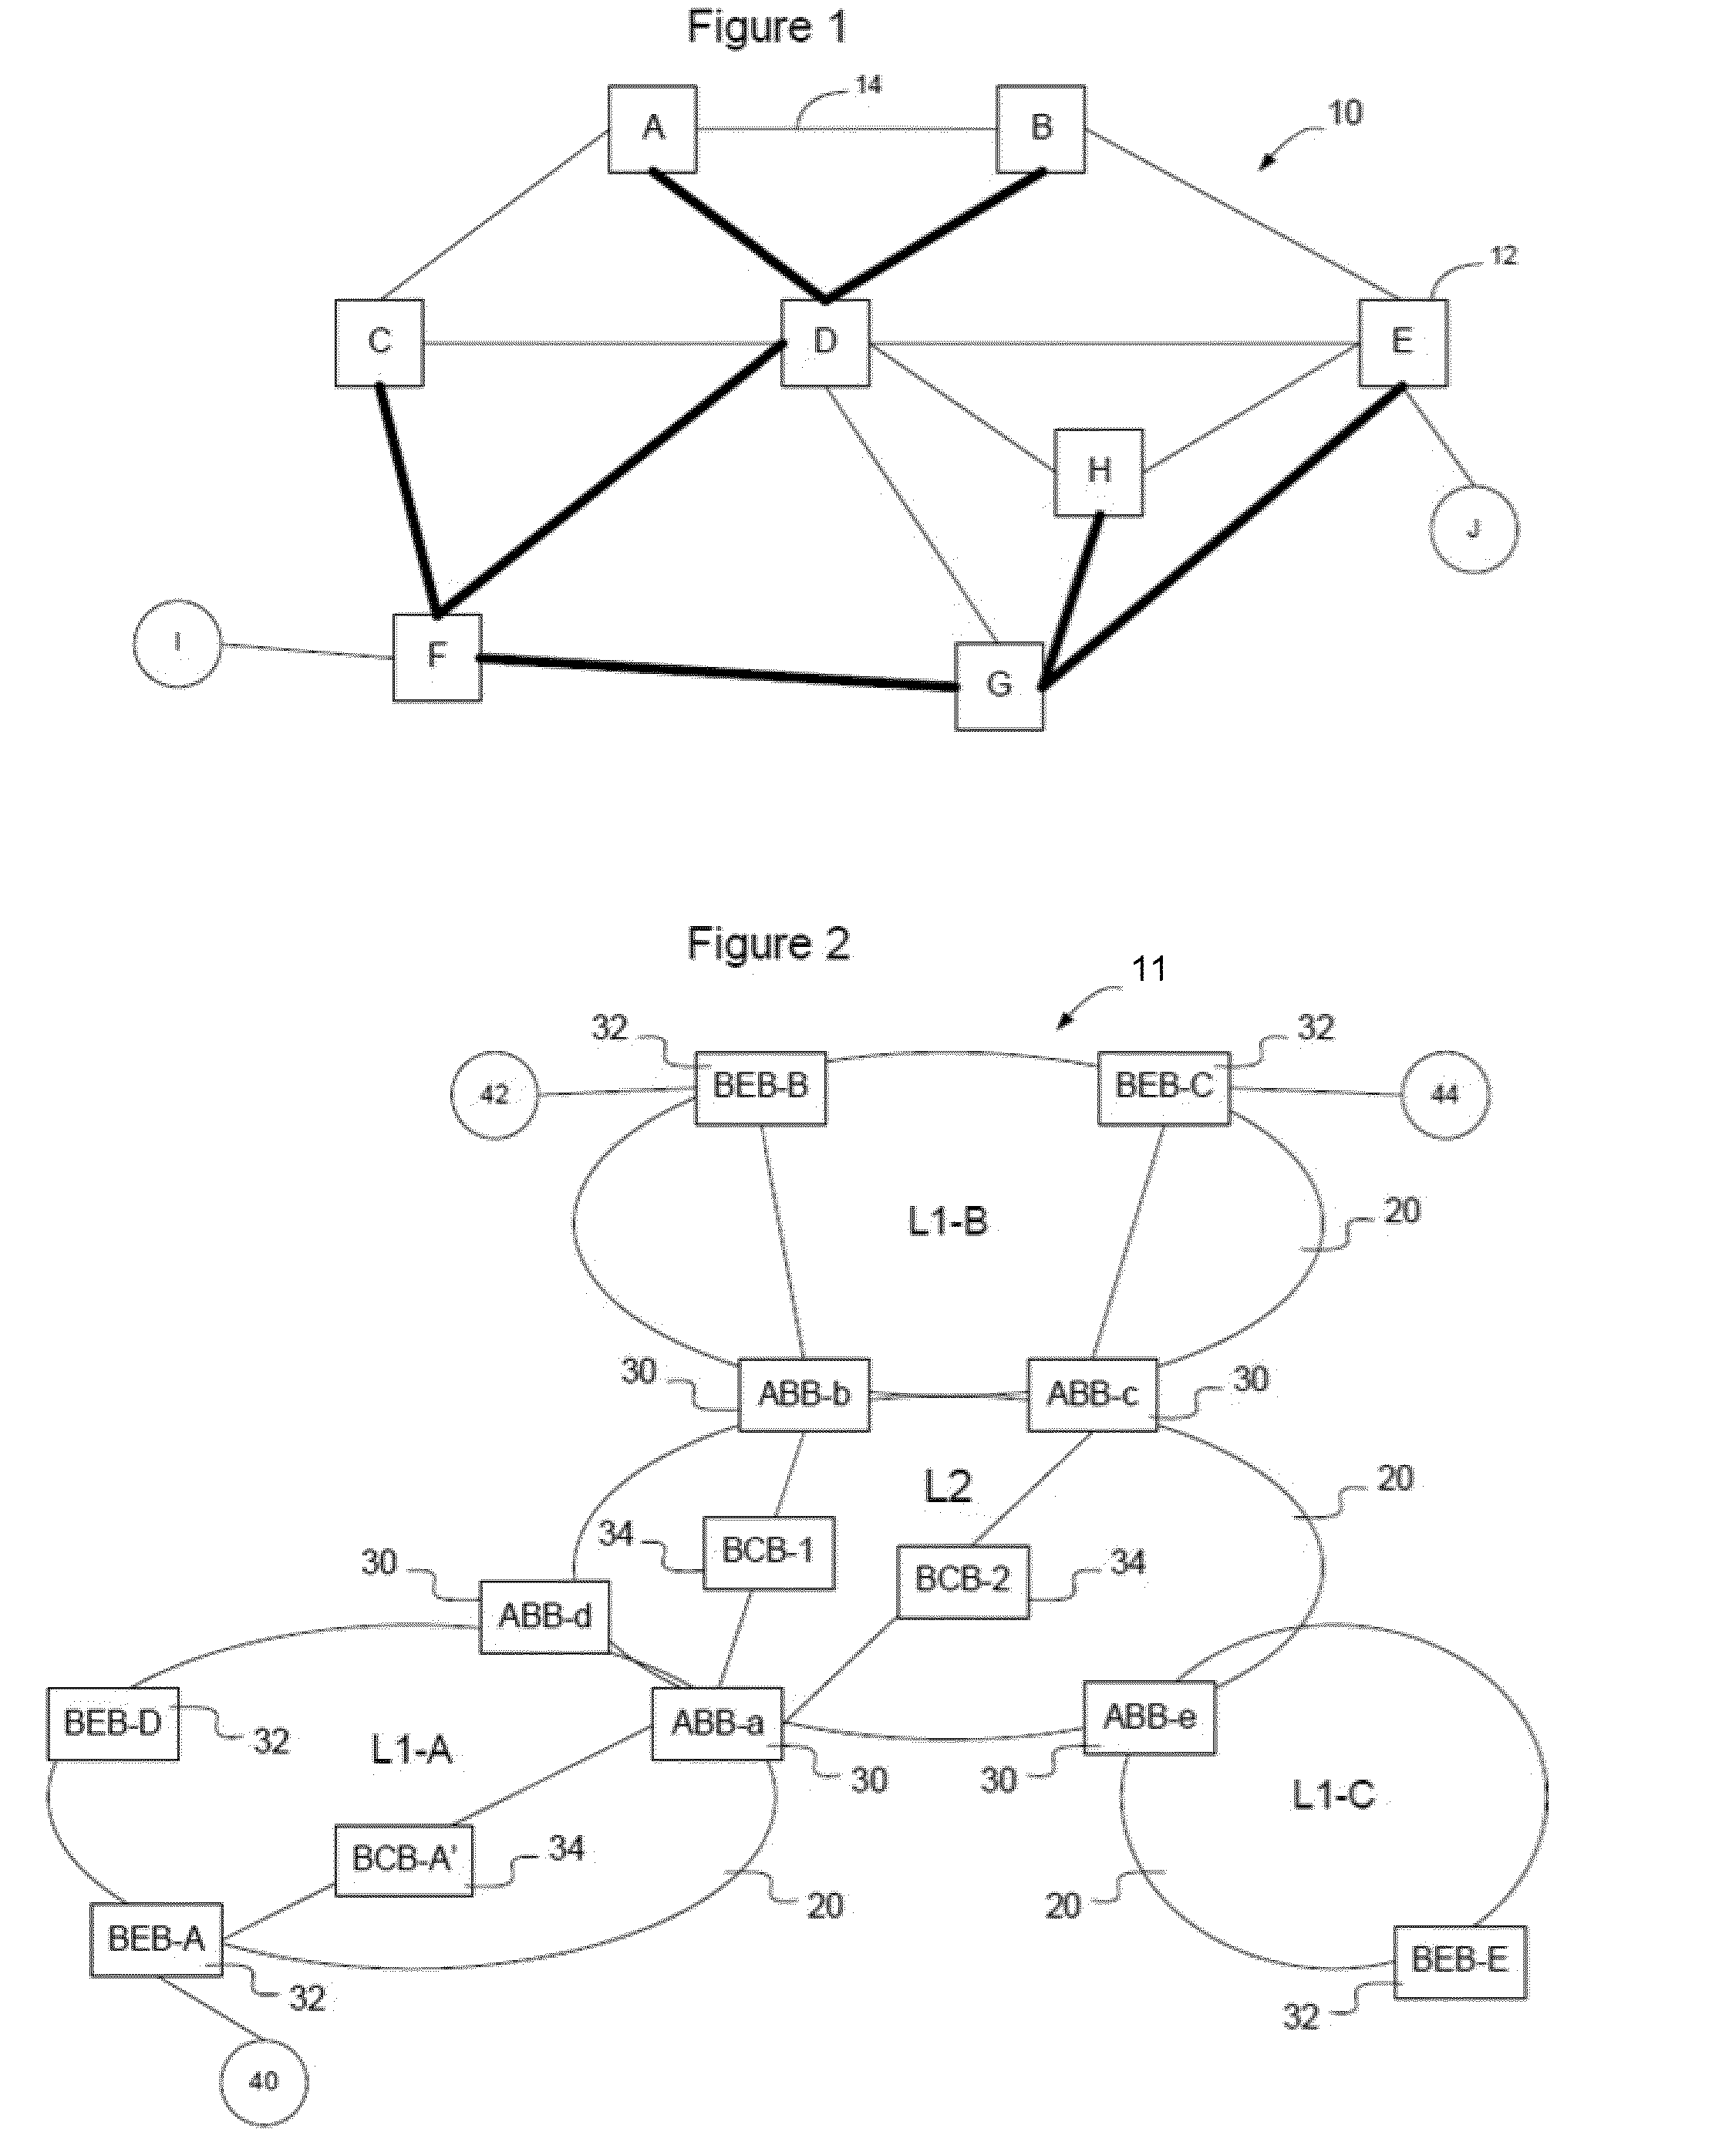 Method and apparatus for exchanging routing information and establishing connectivity across multiple network areas